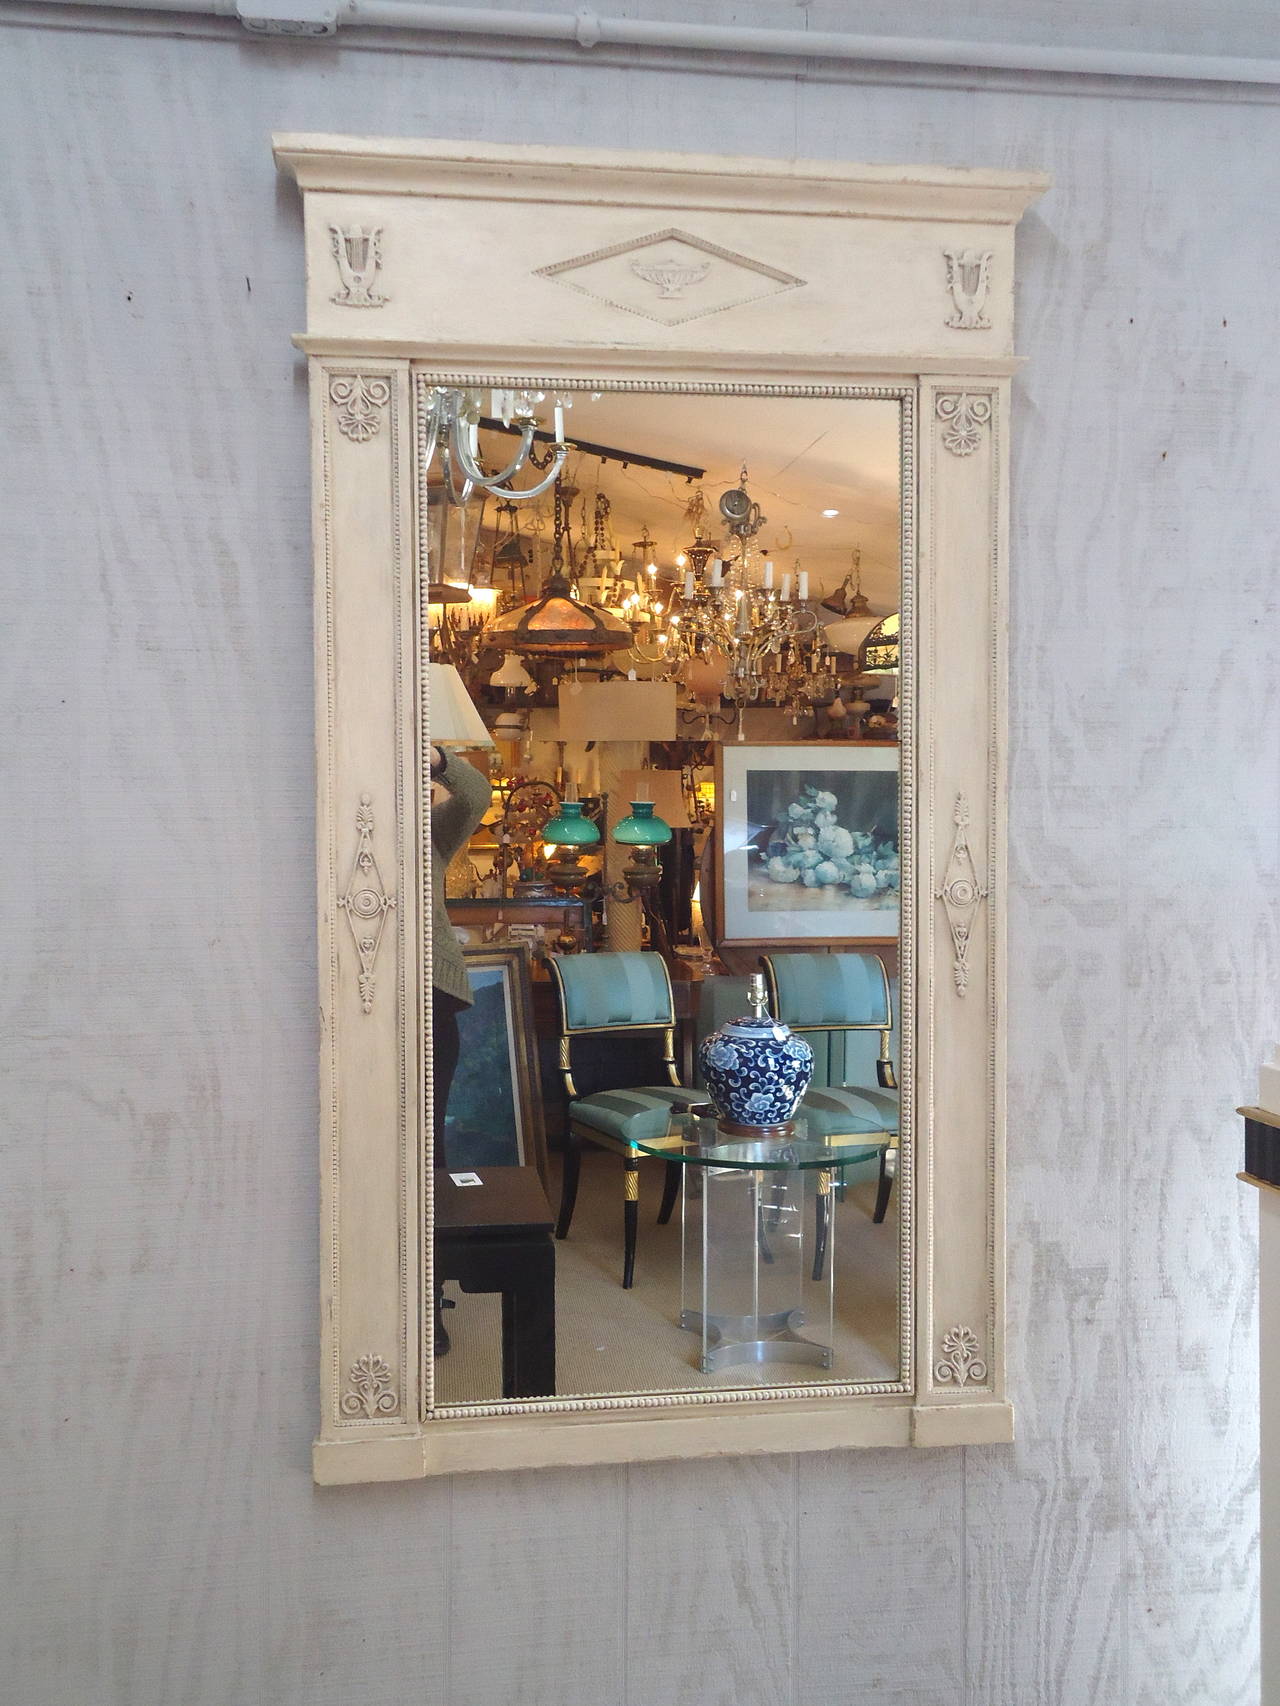 Creamy grey white finish painted wood with lovely neoclassical adornments.  Aged mirror in two pieces, as is customary with this style of mirror.
Body of mirror is 31.5 w